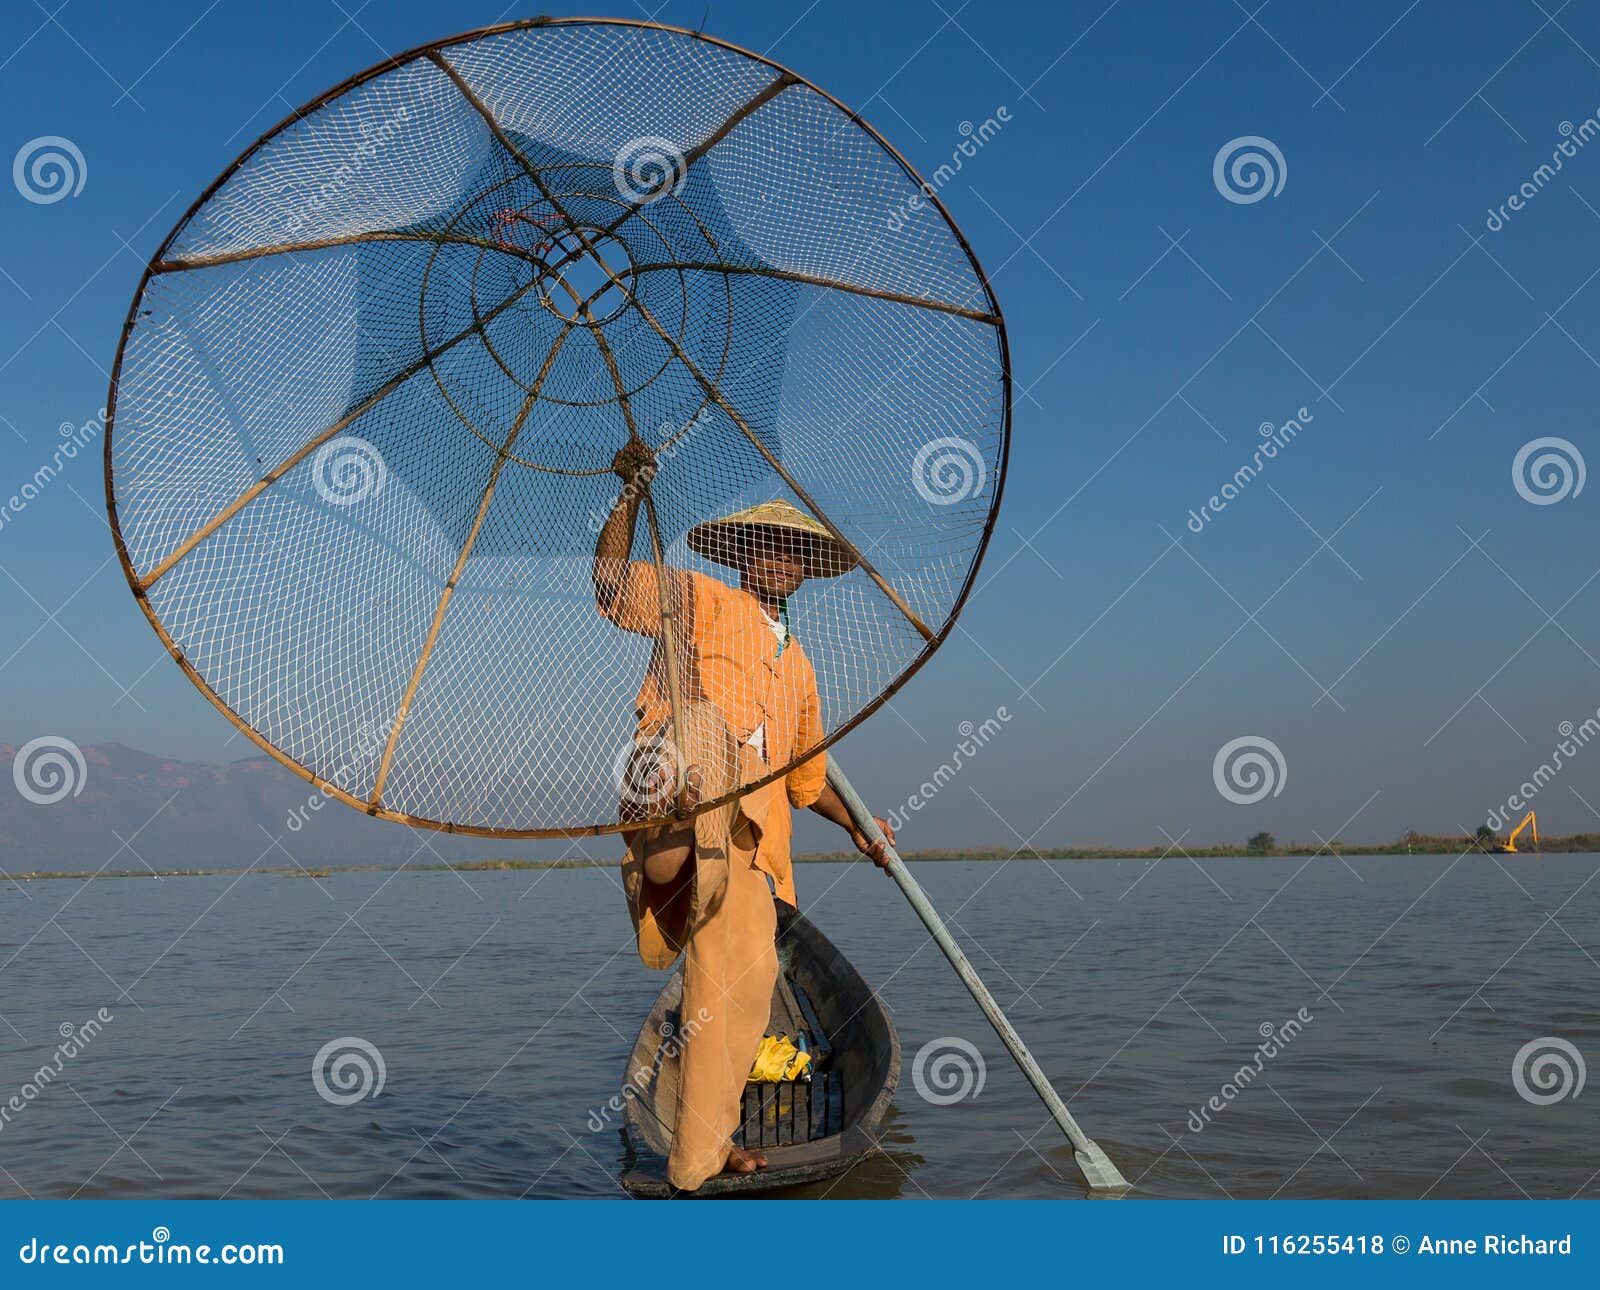 https://thumbs.dreamstime.com/z/burmese-fisherman-leaning-oar-posing-traditional-clothes-hand-foot-holding-his-cone-shaped-fishing-net-front-116255418.jpg